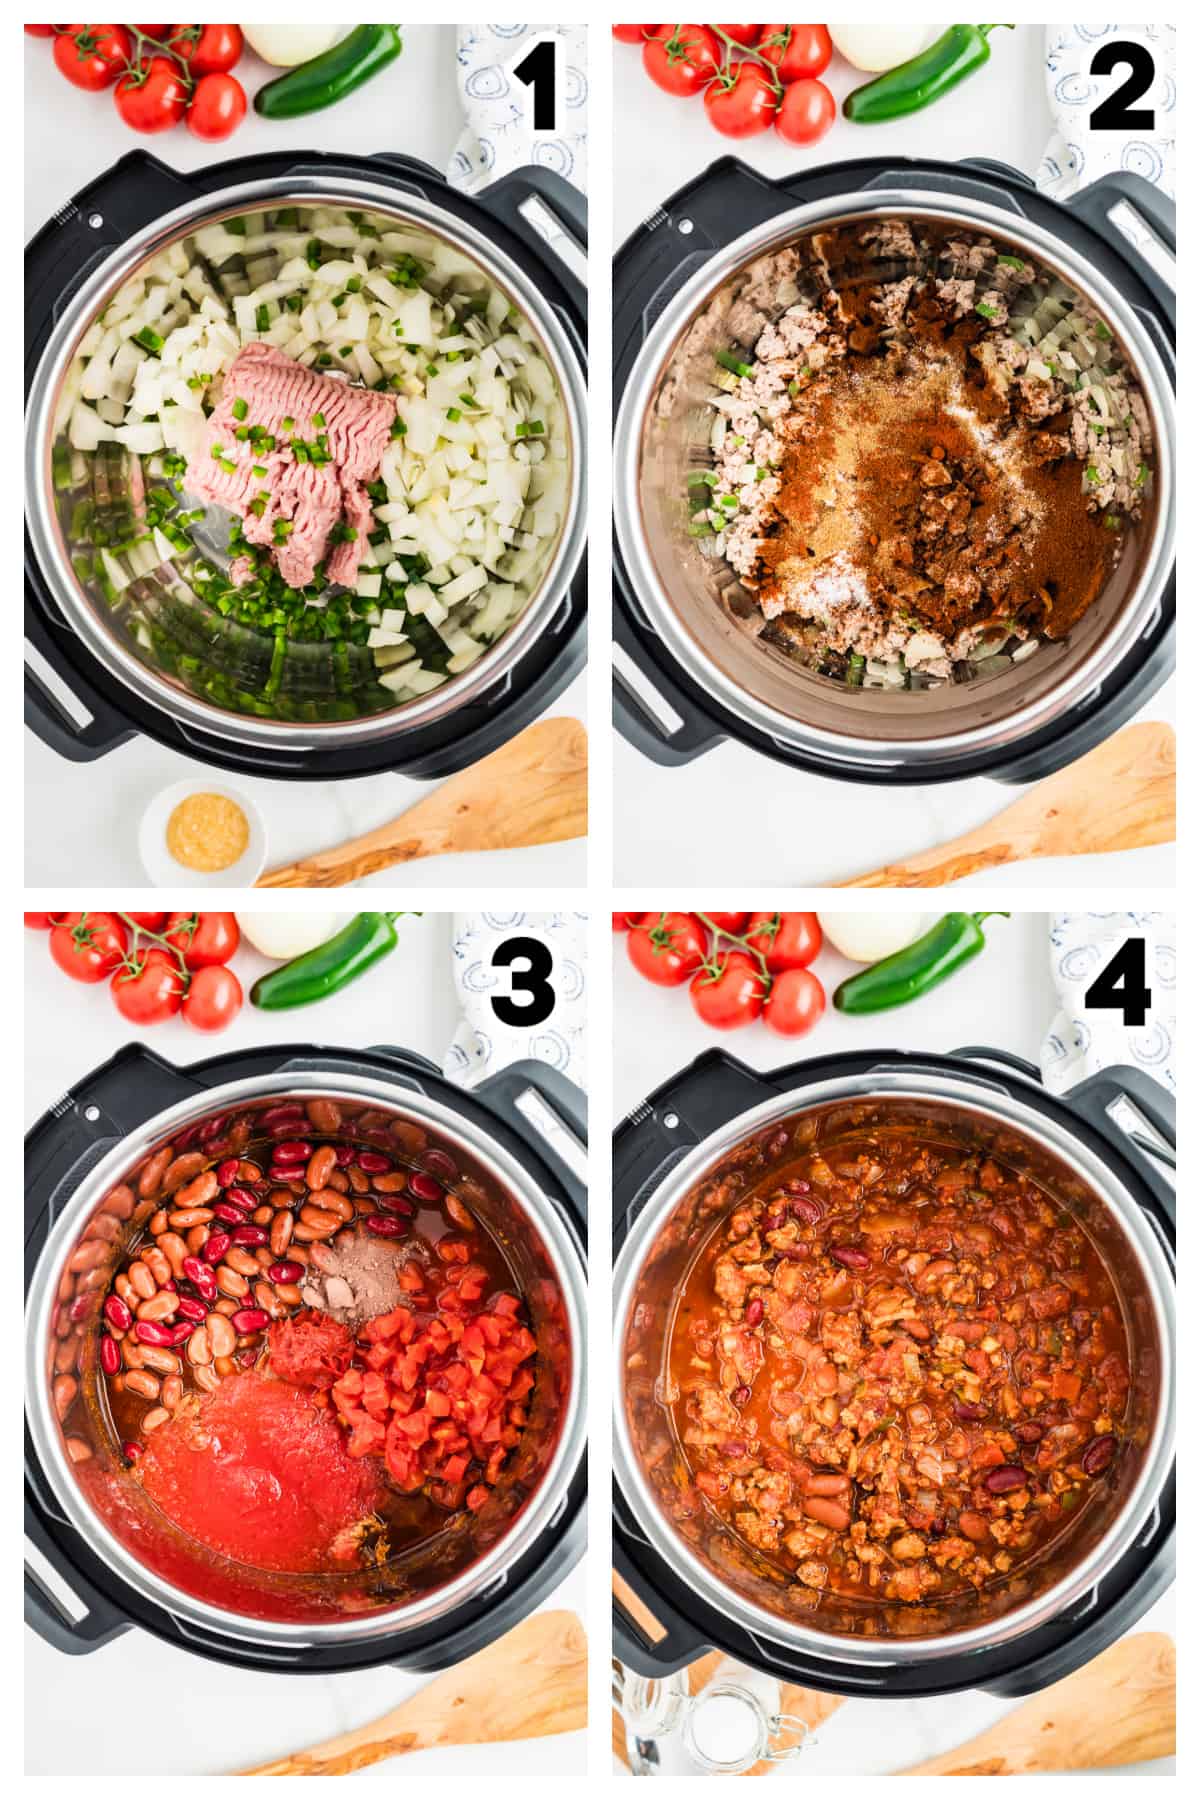 Collage showing how to make turkey chili in the INstant Pot.